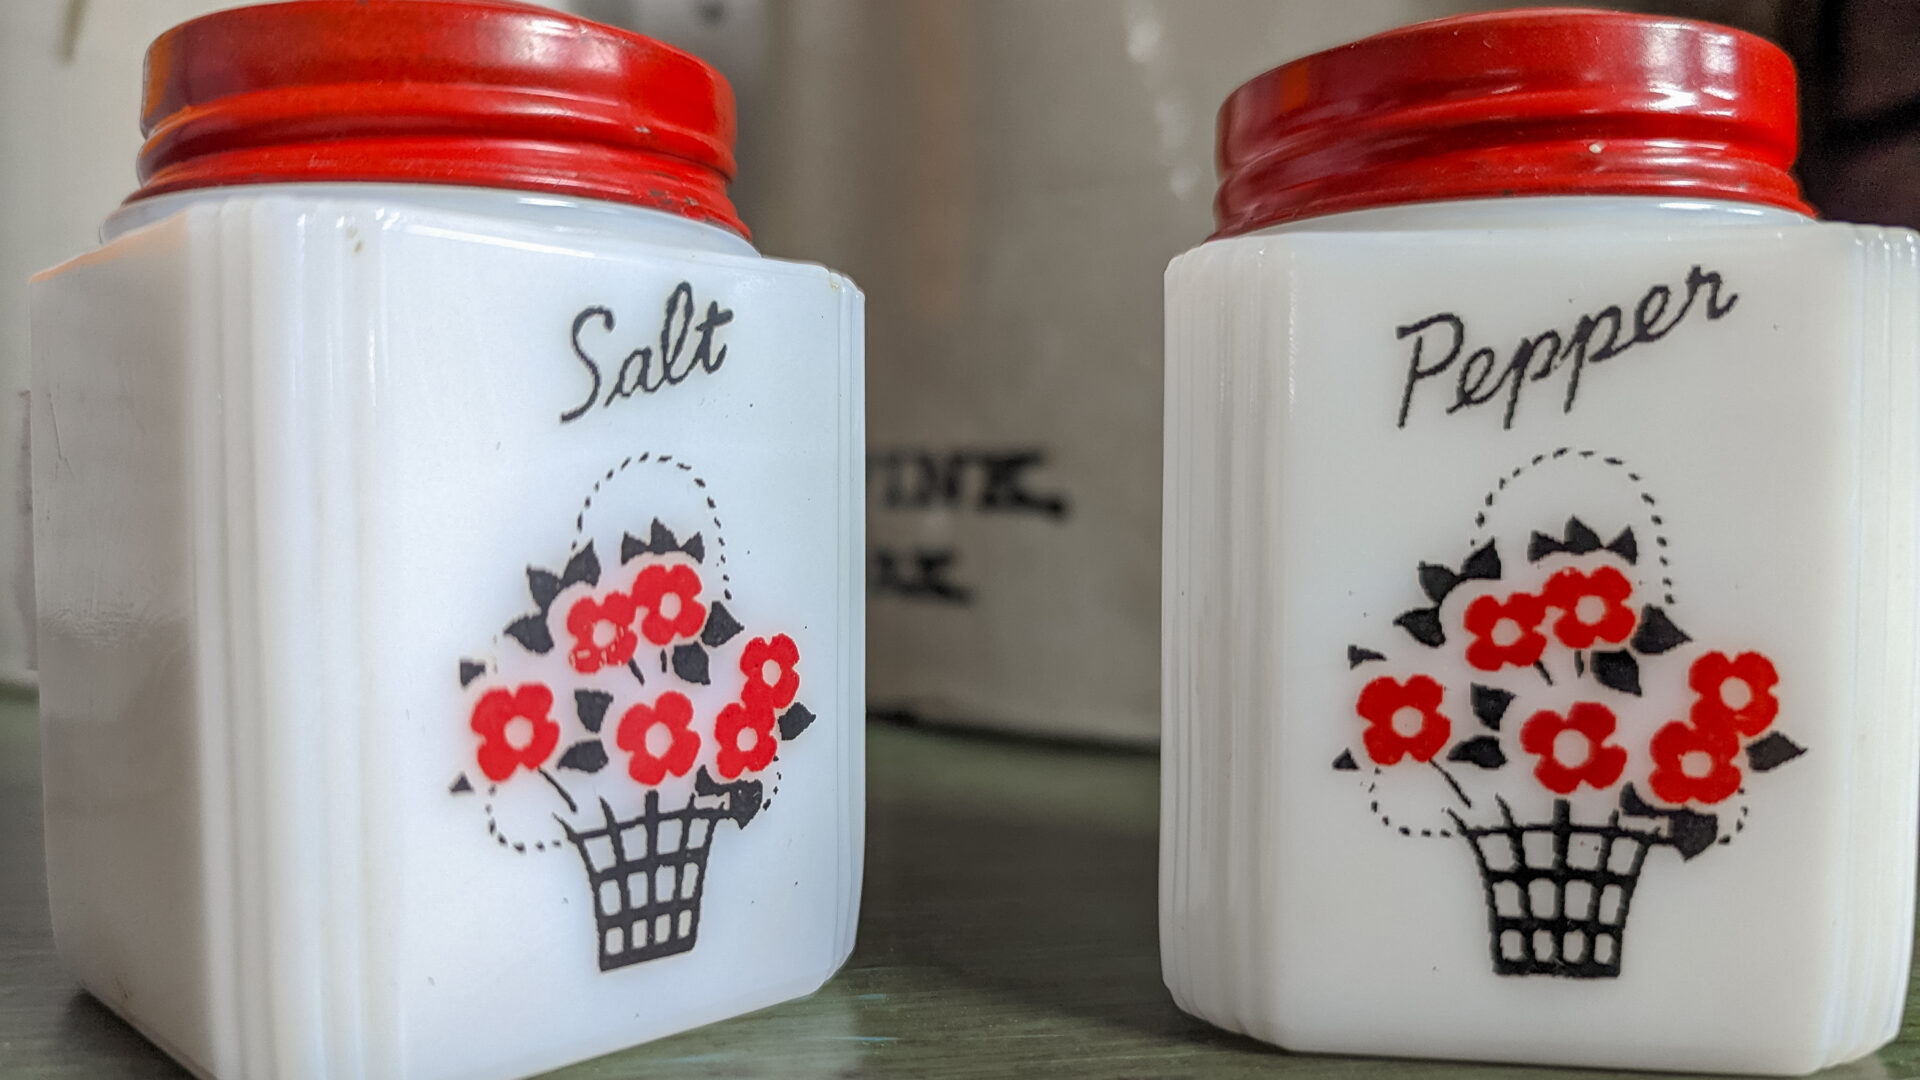 Two white and red containers with flowers on them.